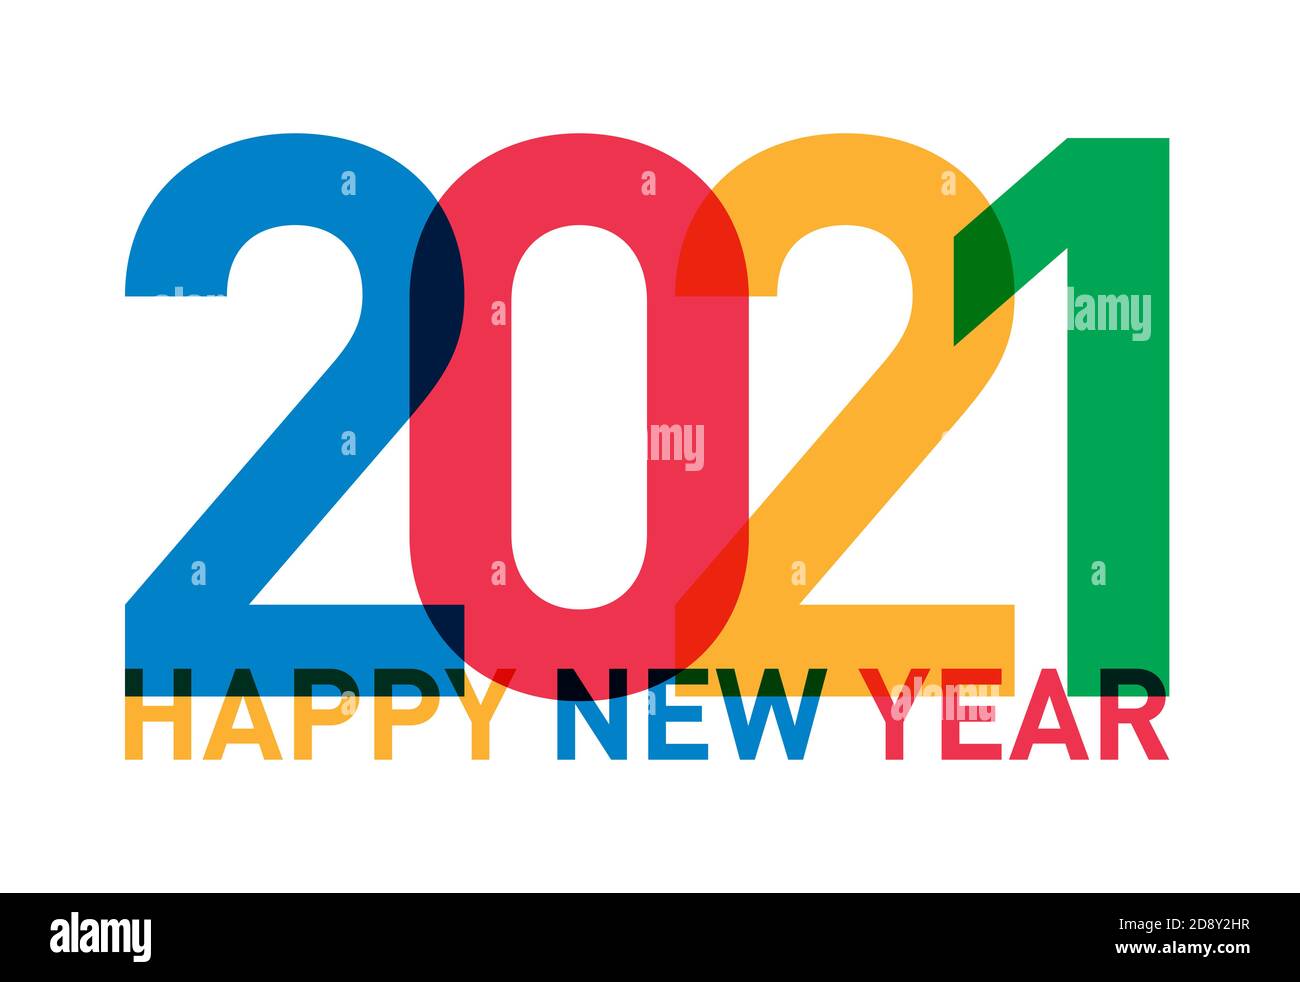 Happy new year 2021 card from the world in different languages and colors Stock Photo